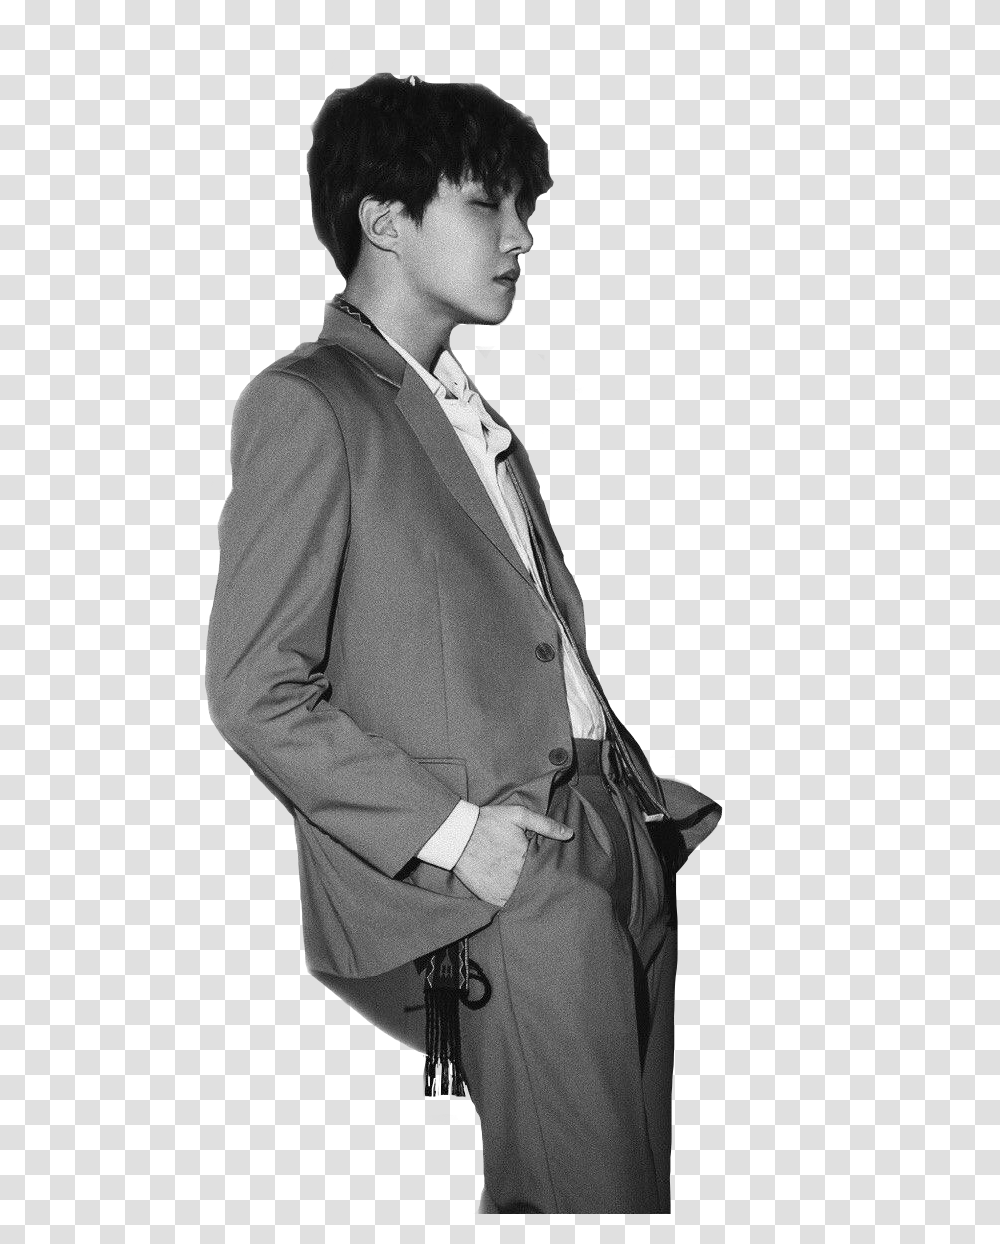 Jhope Bts Bighit Sexy Black Kpop Cute Freetoedit J Hope Daydream, Suit, Overcoat, Person Transparent Png